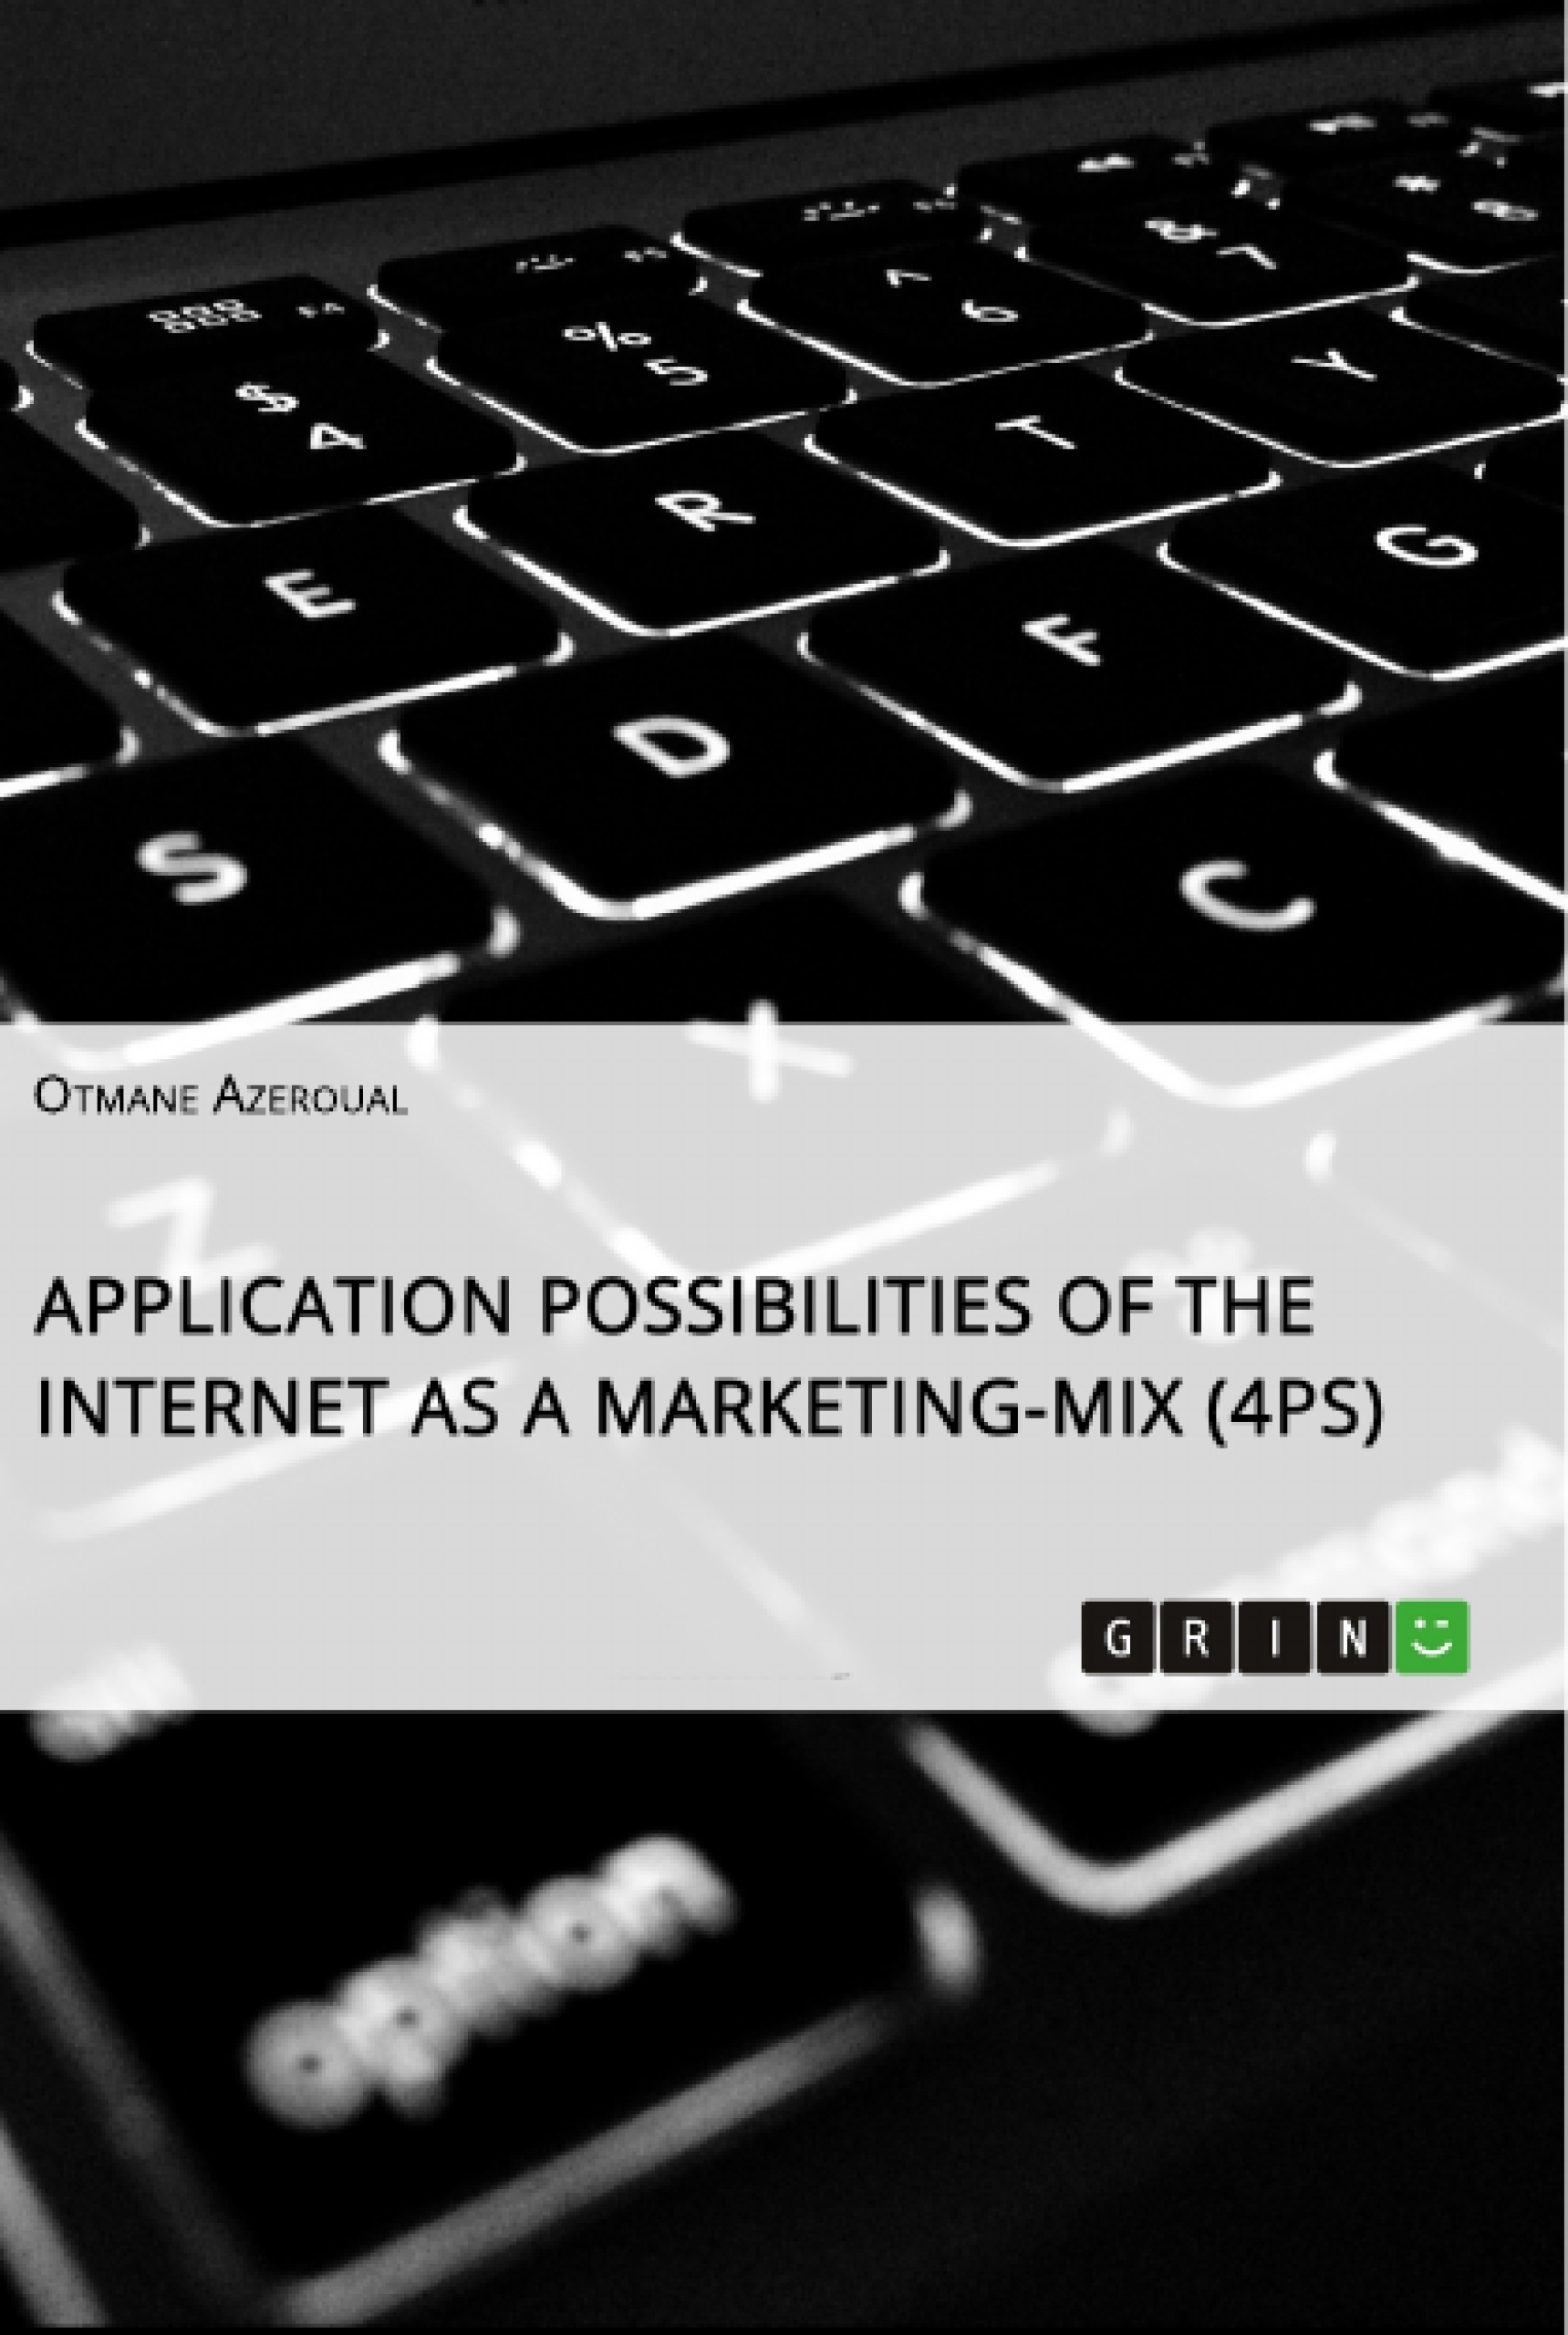 Titel: Application possibilities of the Internet as a Marketing-Mix (4Ps)